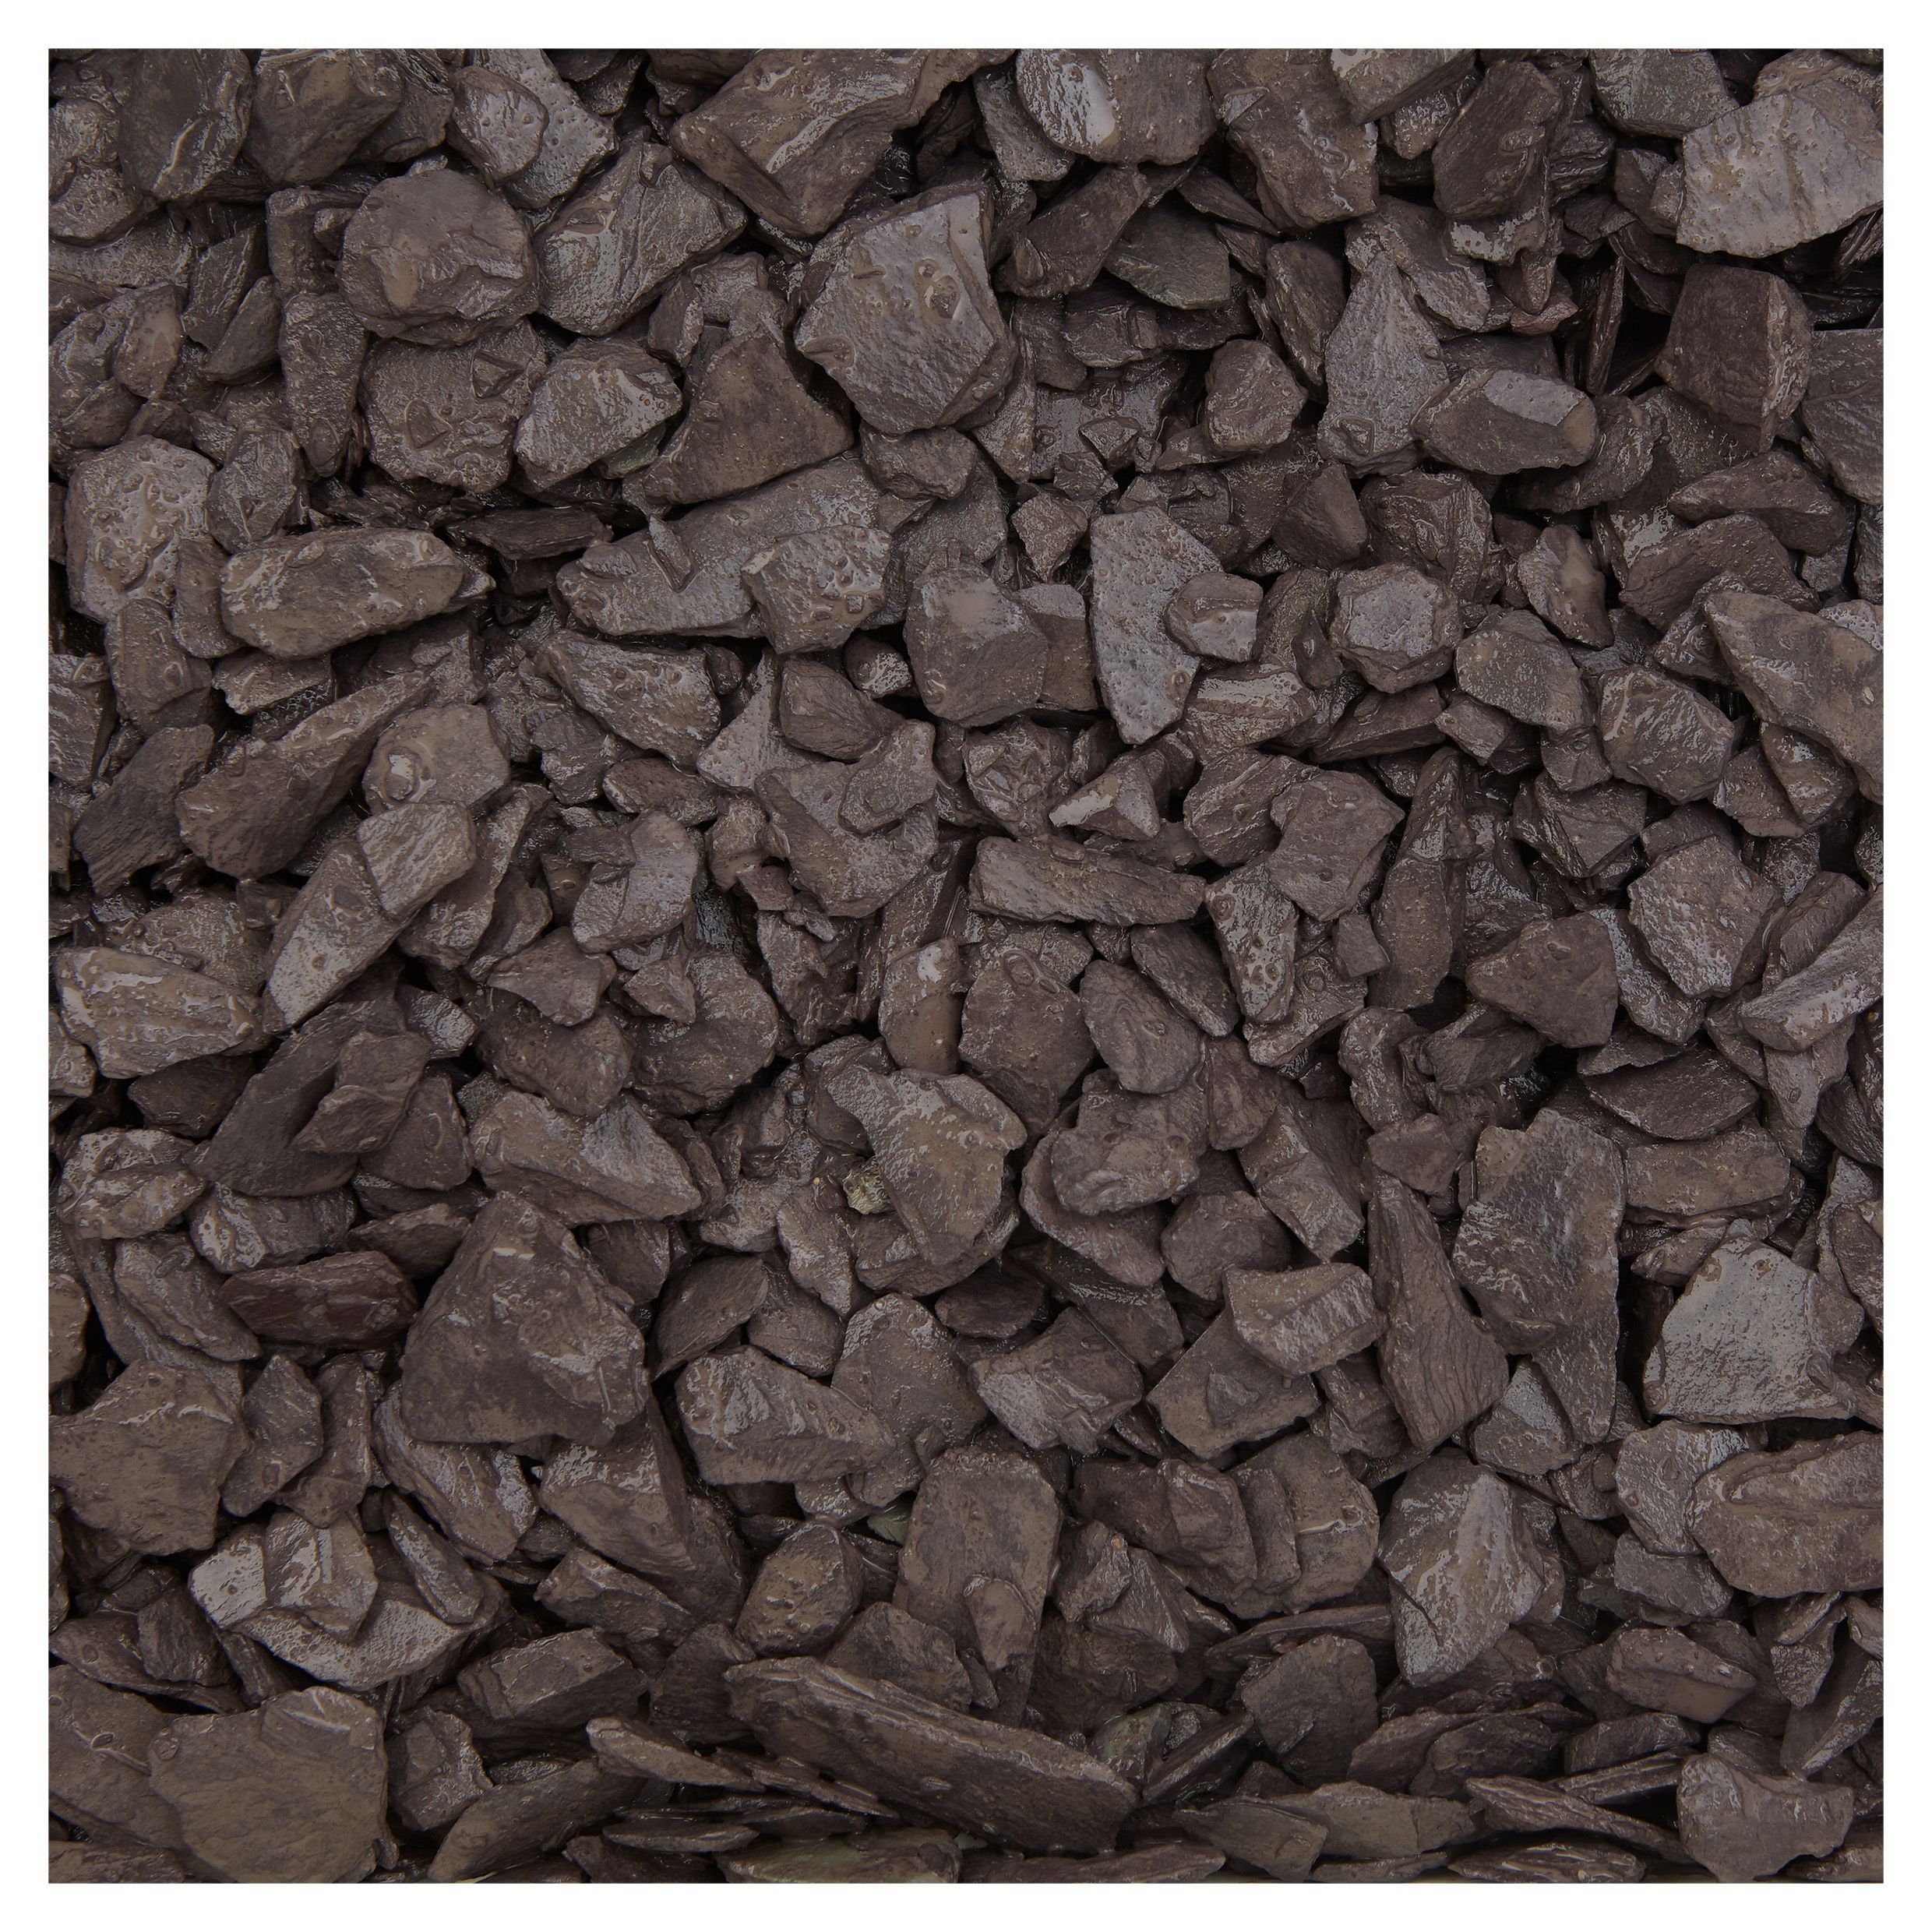 Blooma Blue 20mm Slate Decorative chippings, Large Bag, 0.3m²